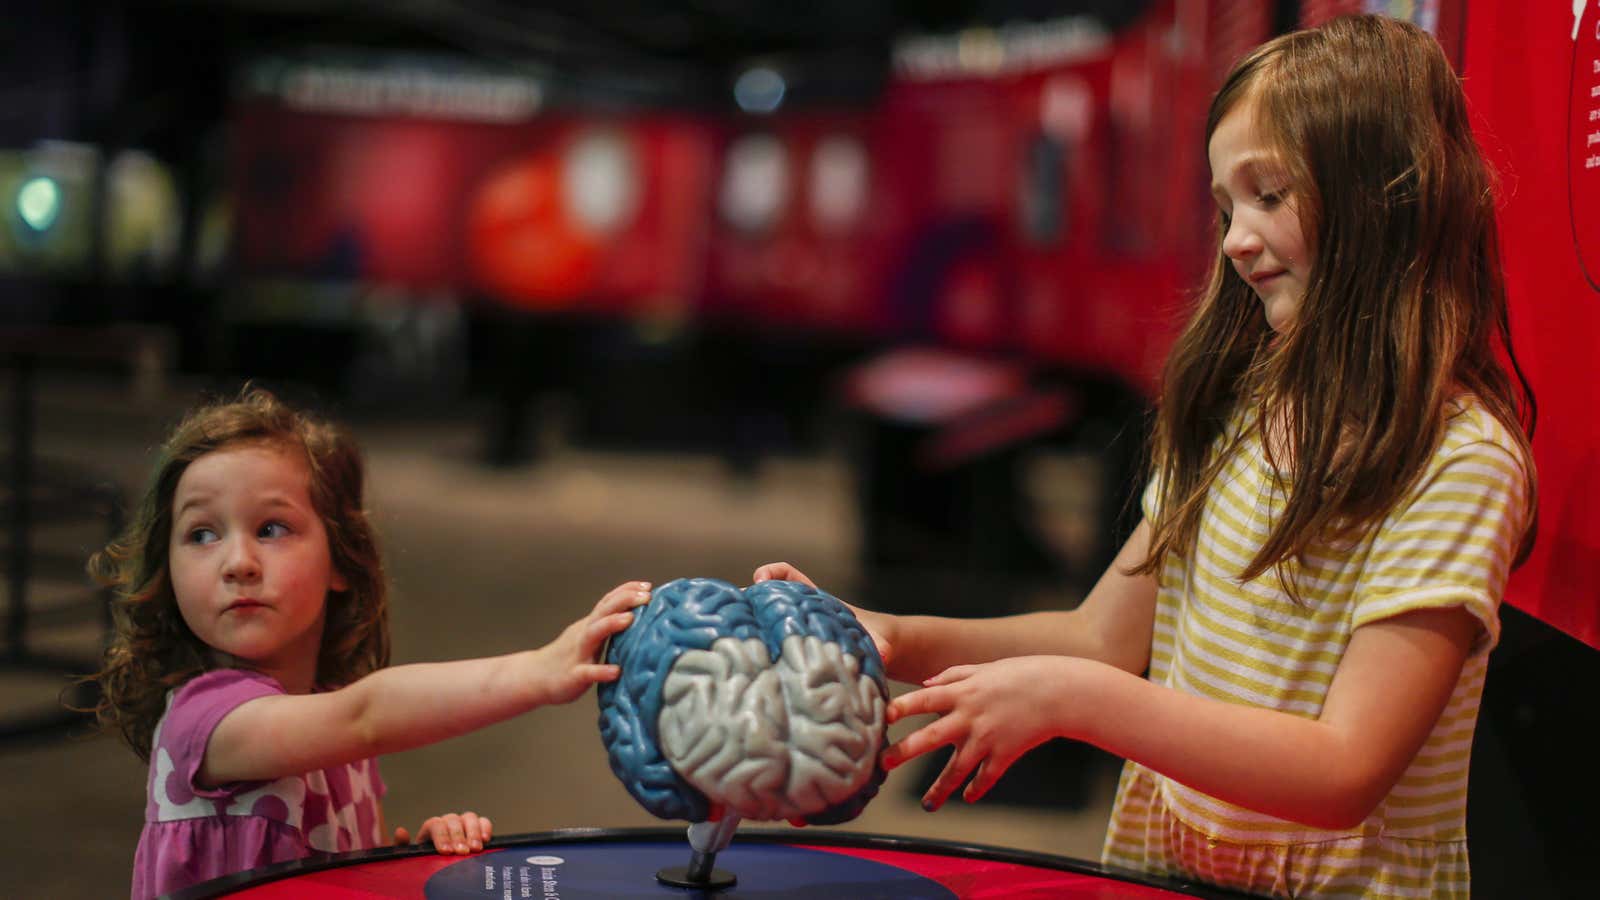 Your brain adapts to its environment, deciding when learning is necessary.